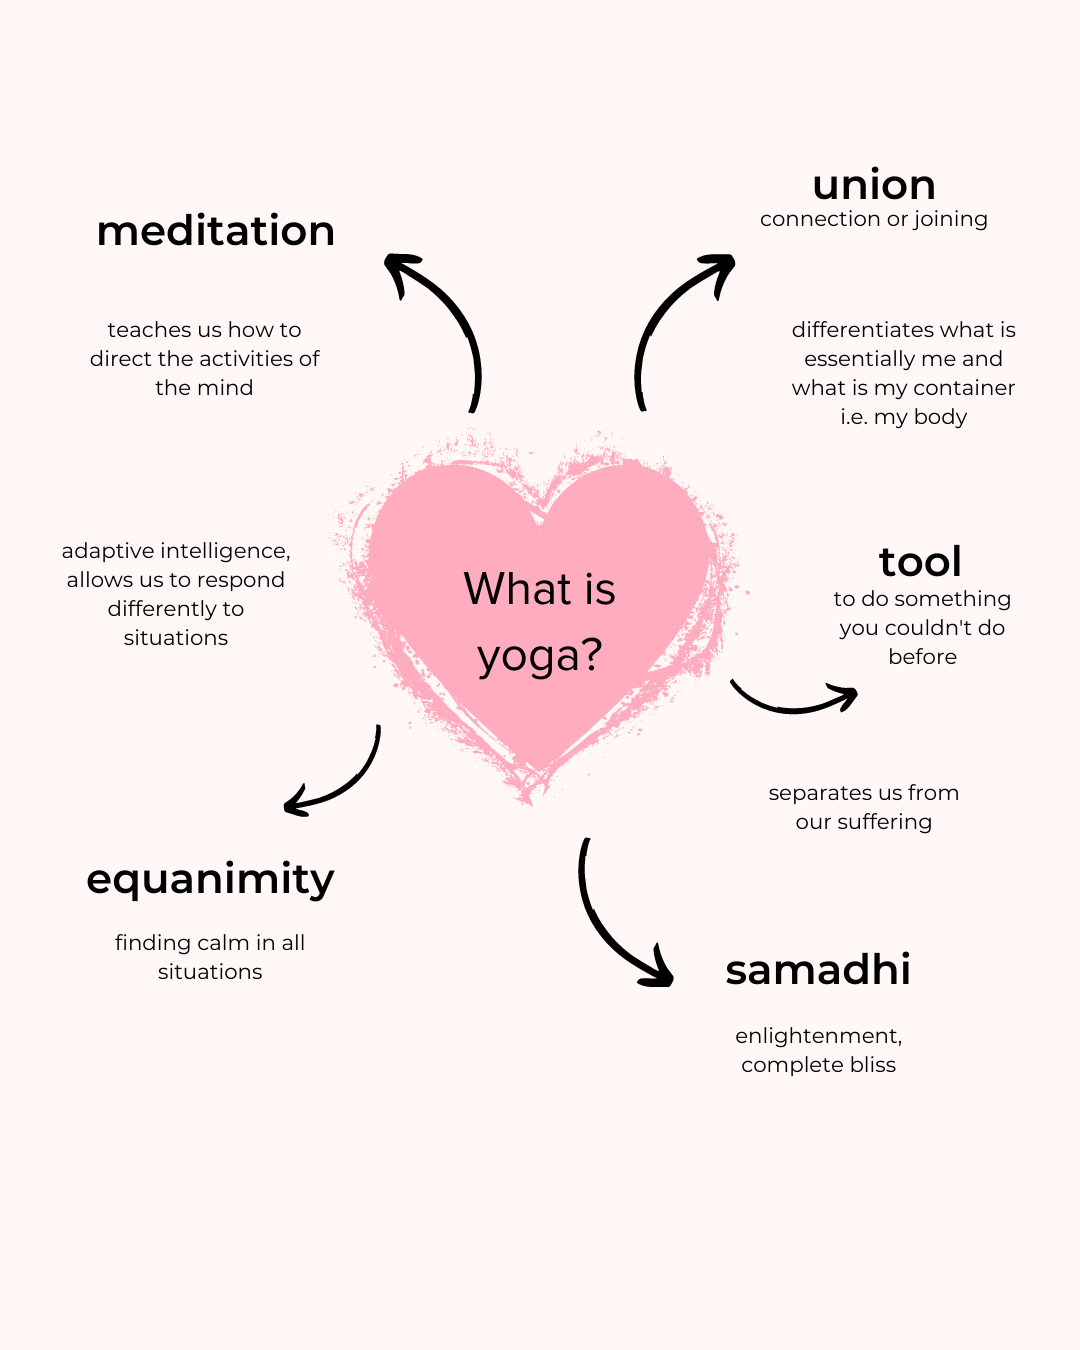 What is yoga